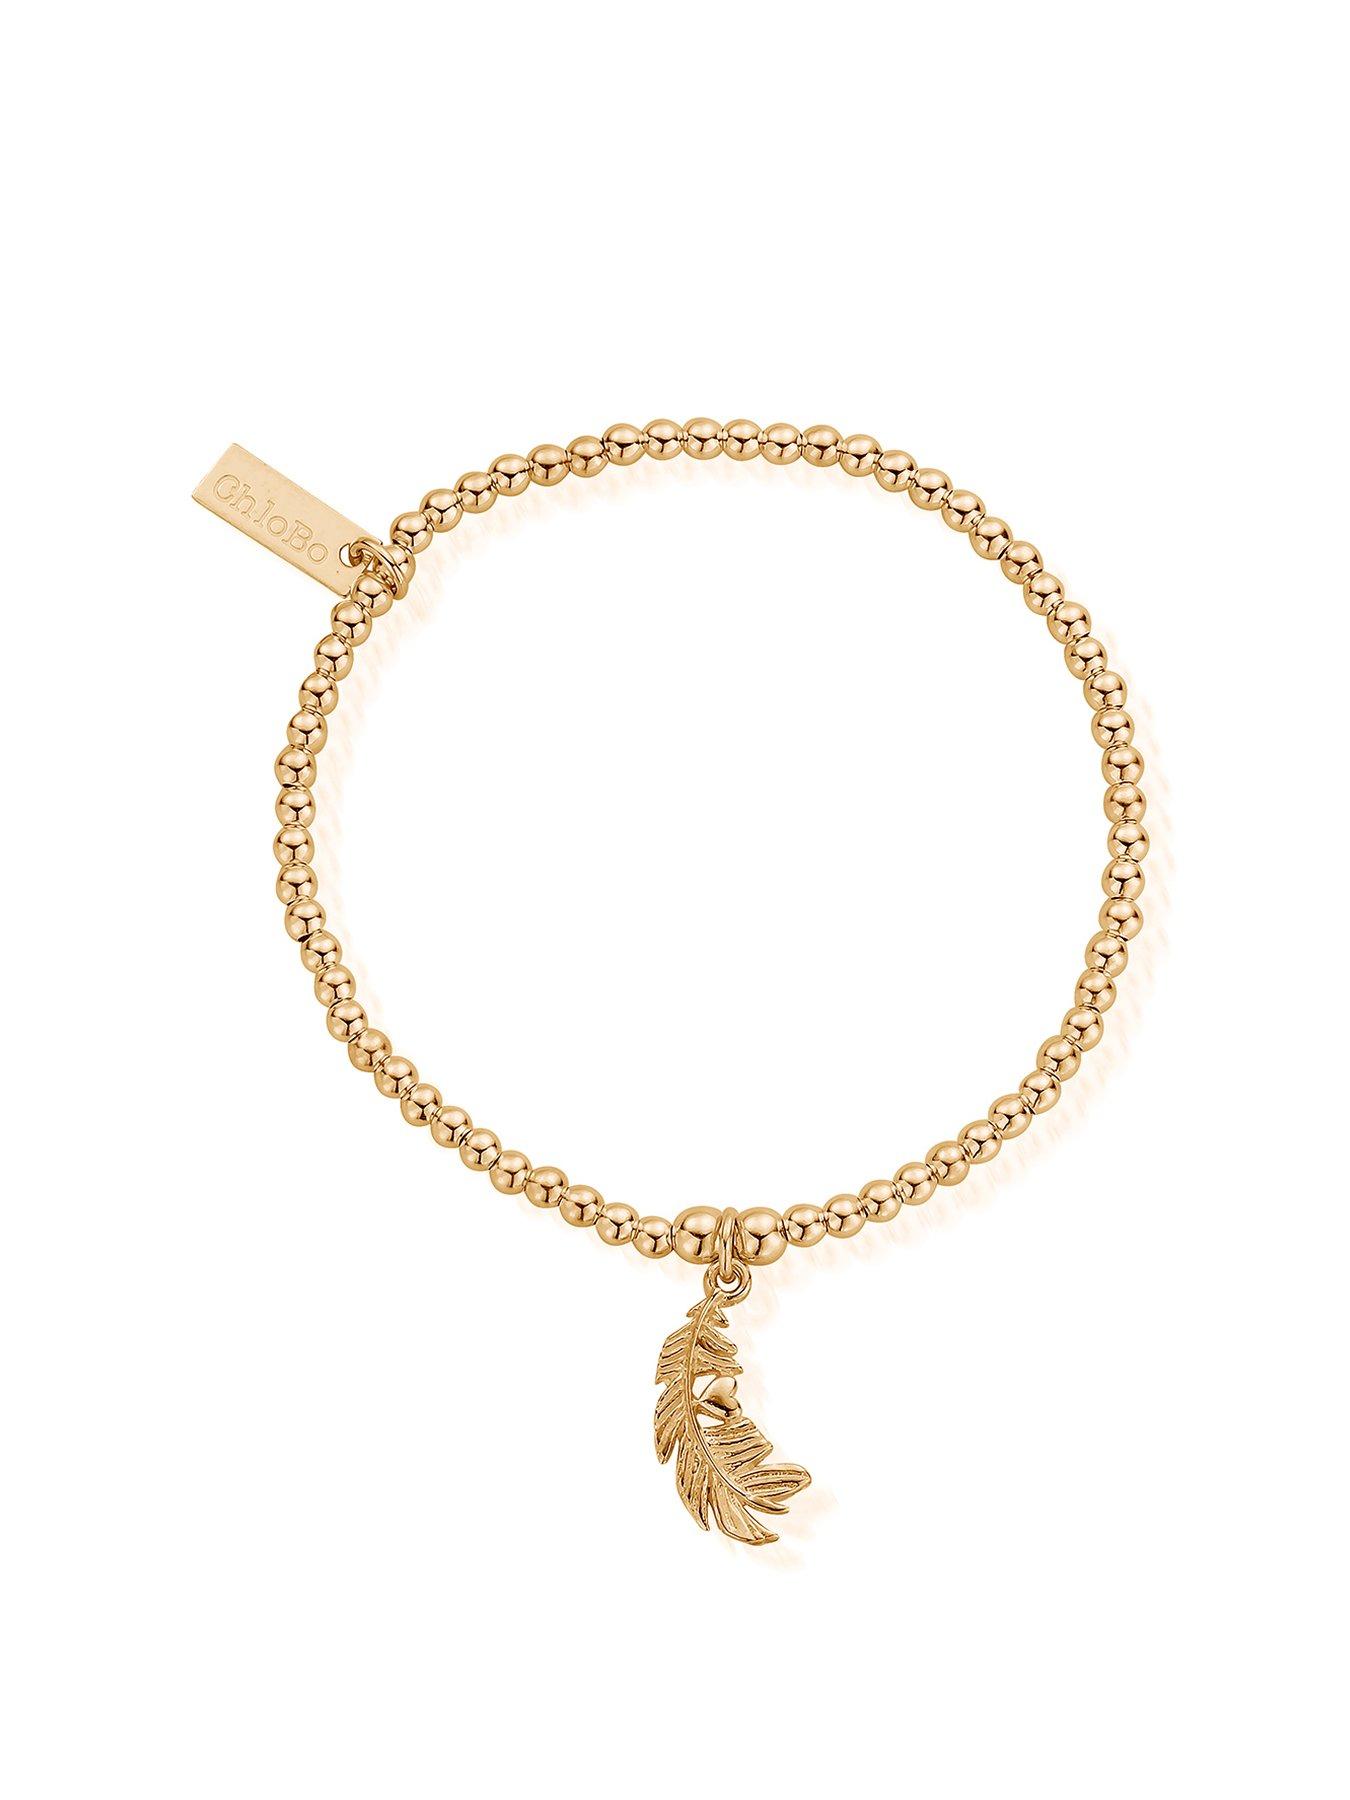 Women Gold Cute Charm Feather Heart Bracelet Gold Plated 925 Sterling Silver